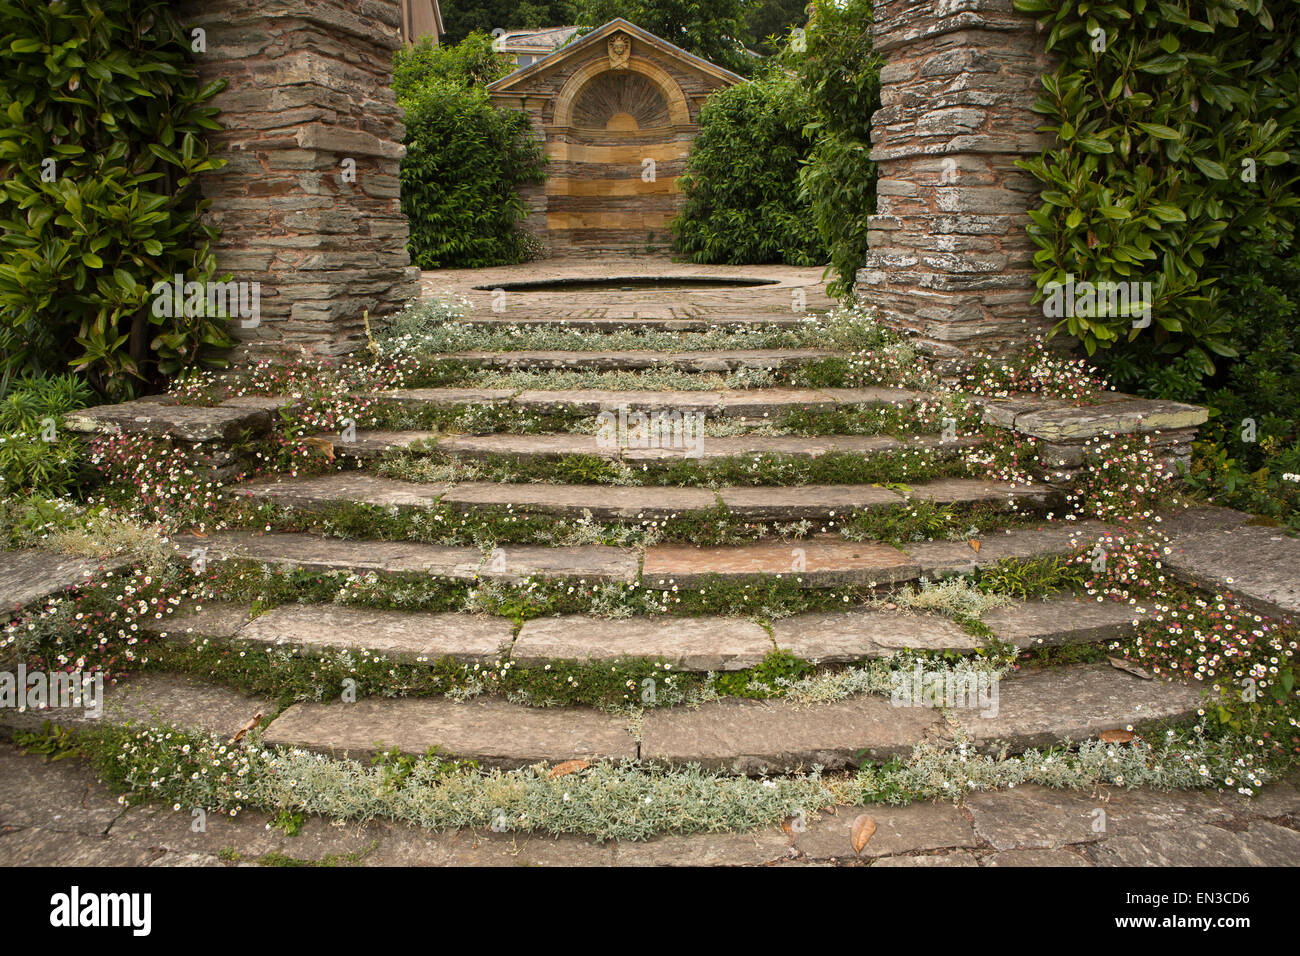 UK, England, Somerset, Cheddon Fitzpaine, Hestercombe Gardens, stone steps planted with pink and white daisies Stock Photo